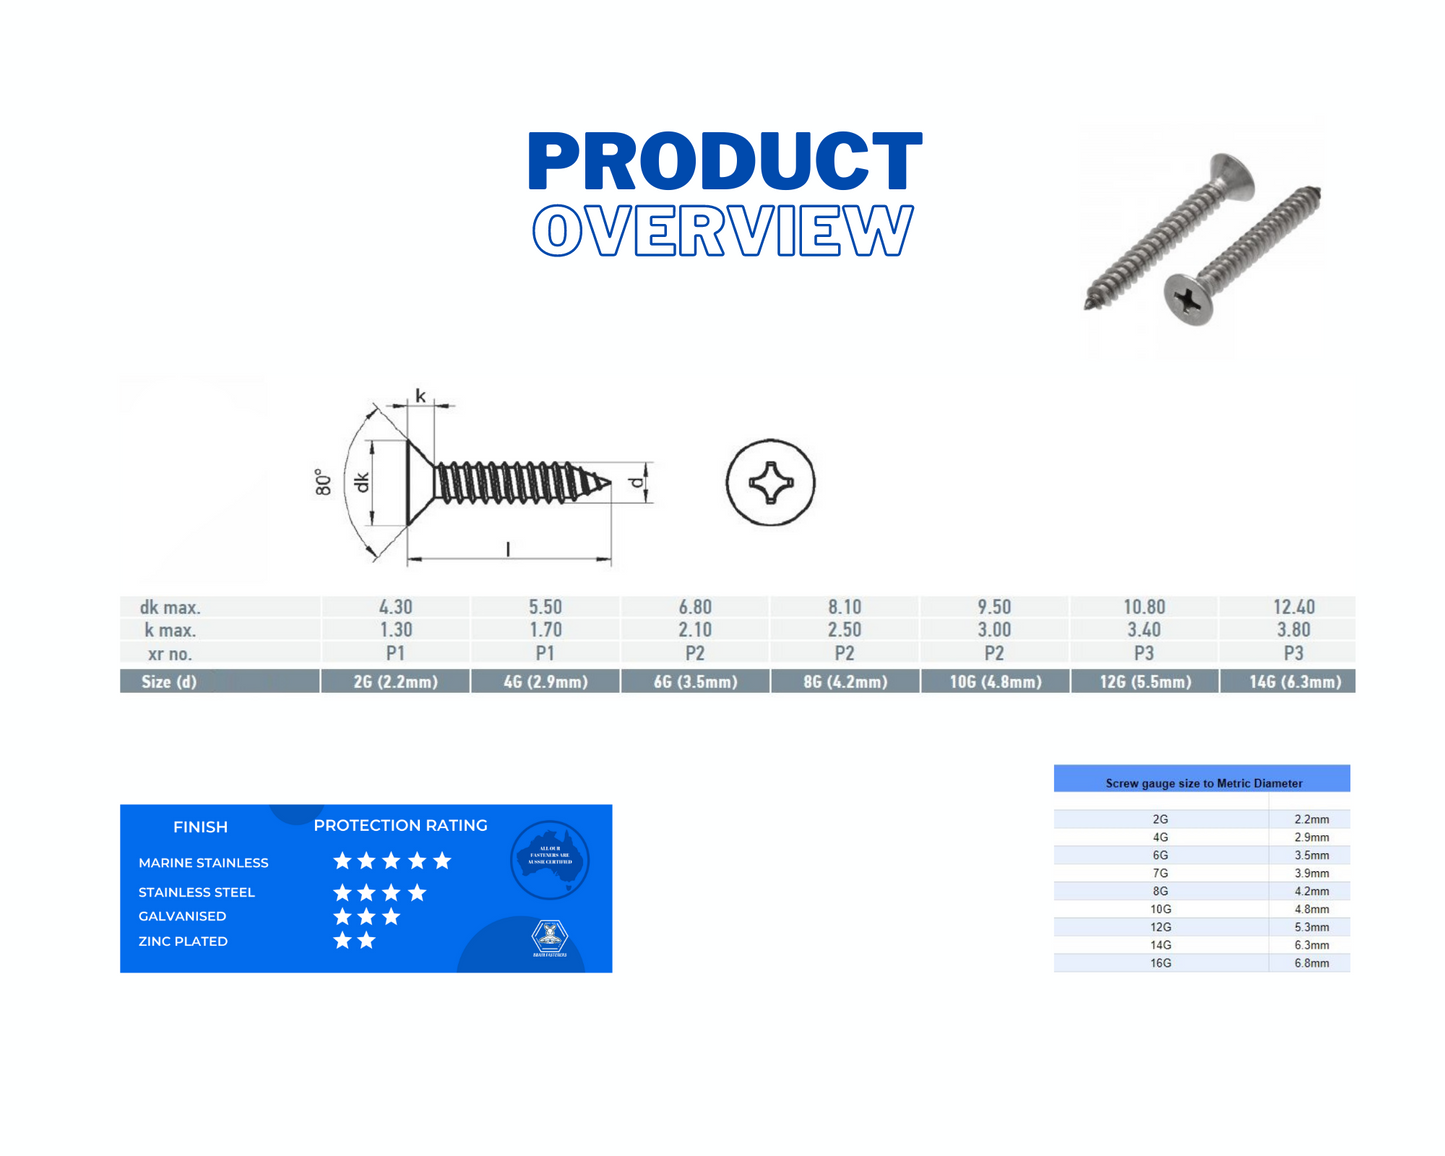 6G x 16mm Countersunk Phillips Self Tapping Screws Stainless Steel